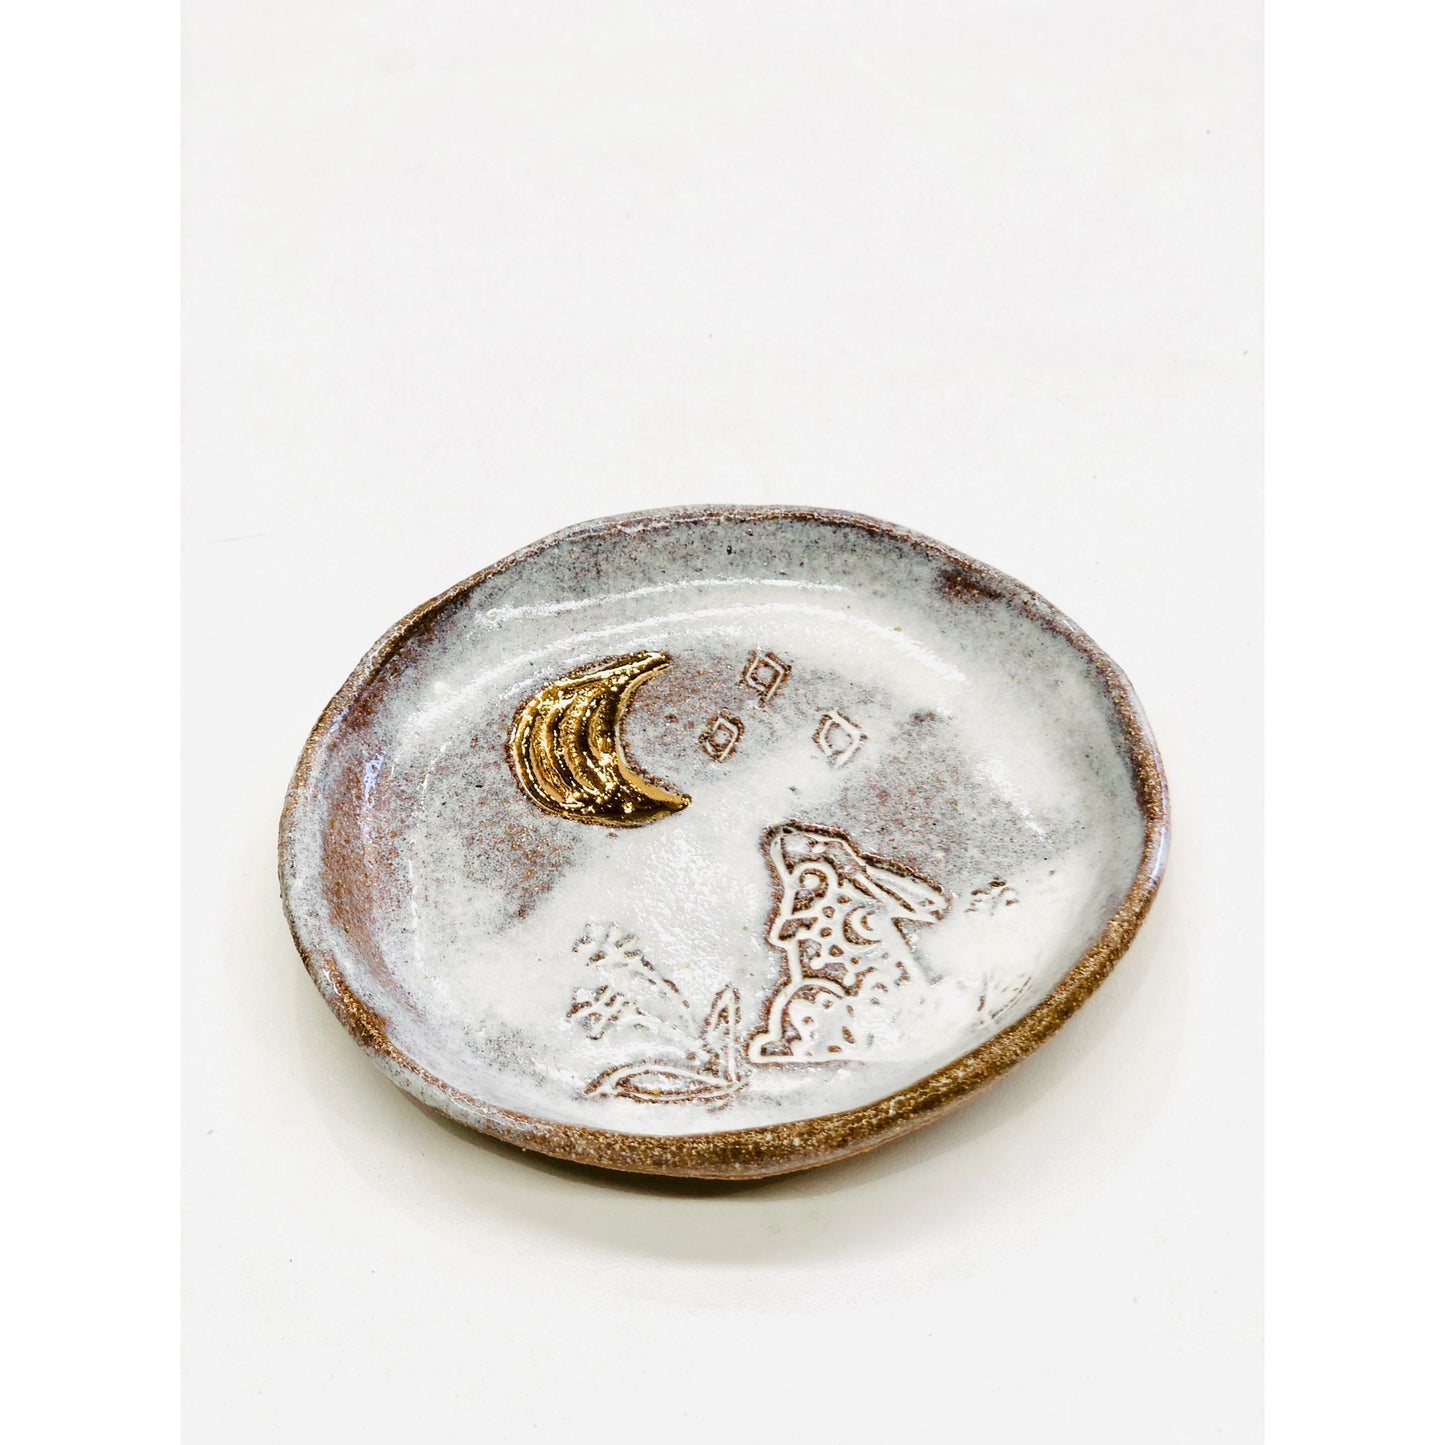 Bunny and Moon Round dish ✨ 50% off